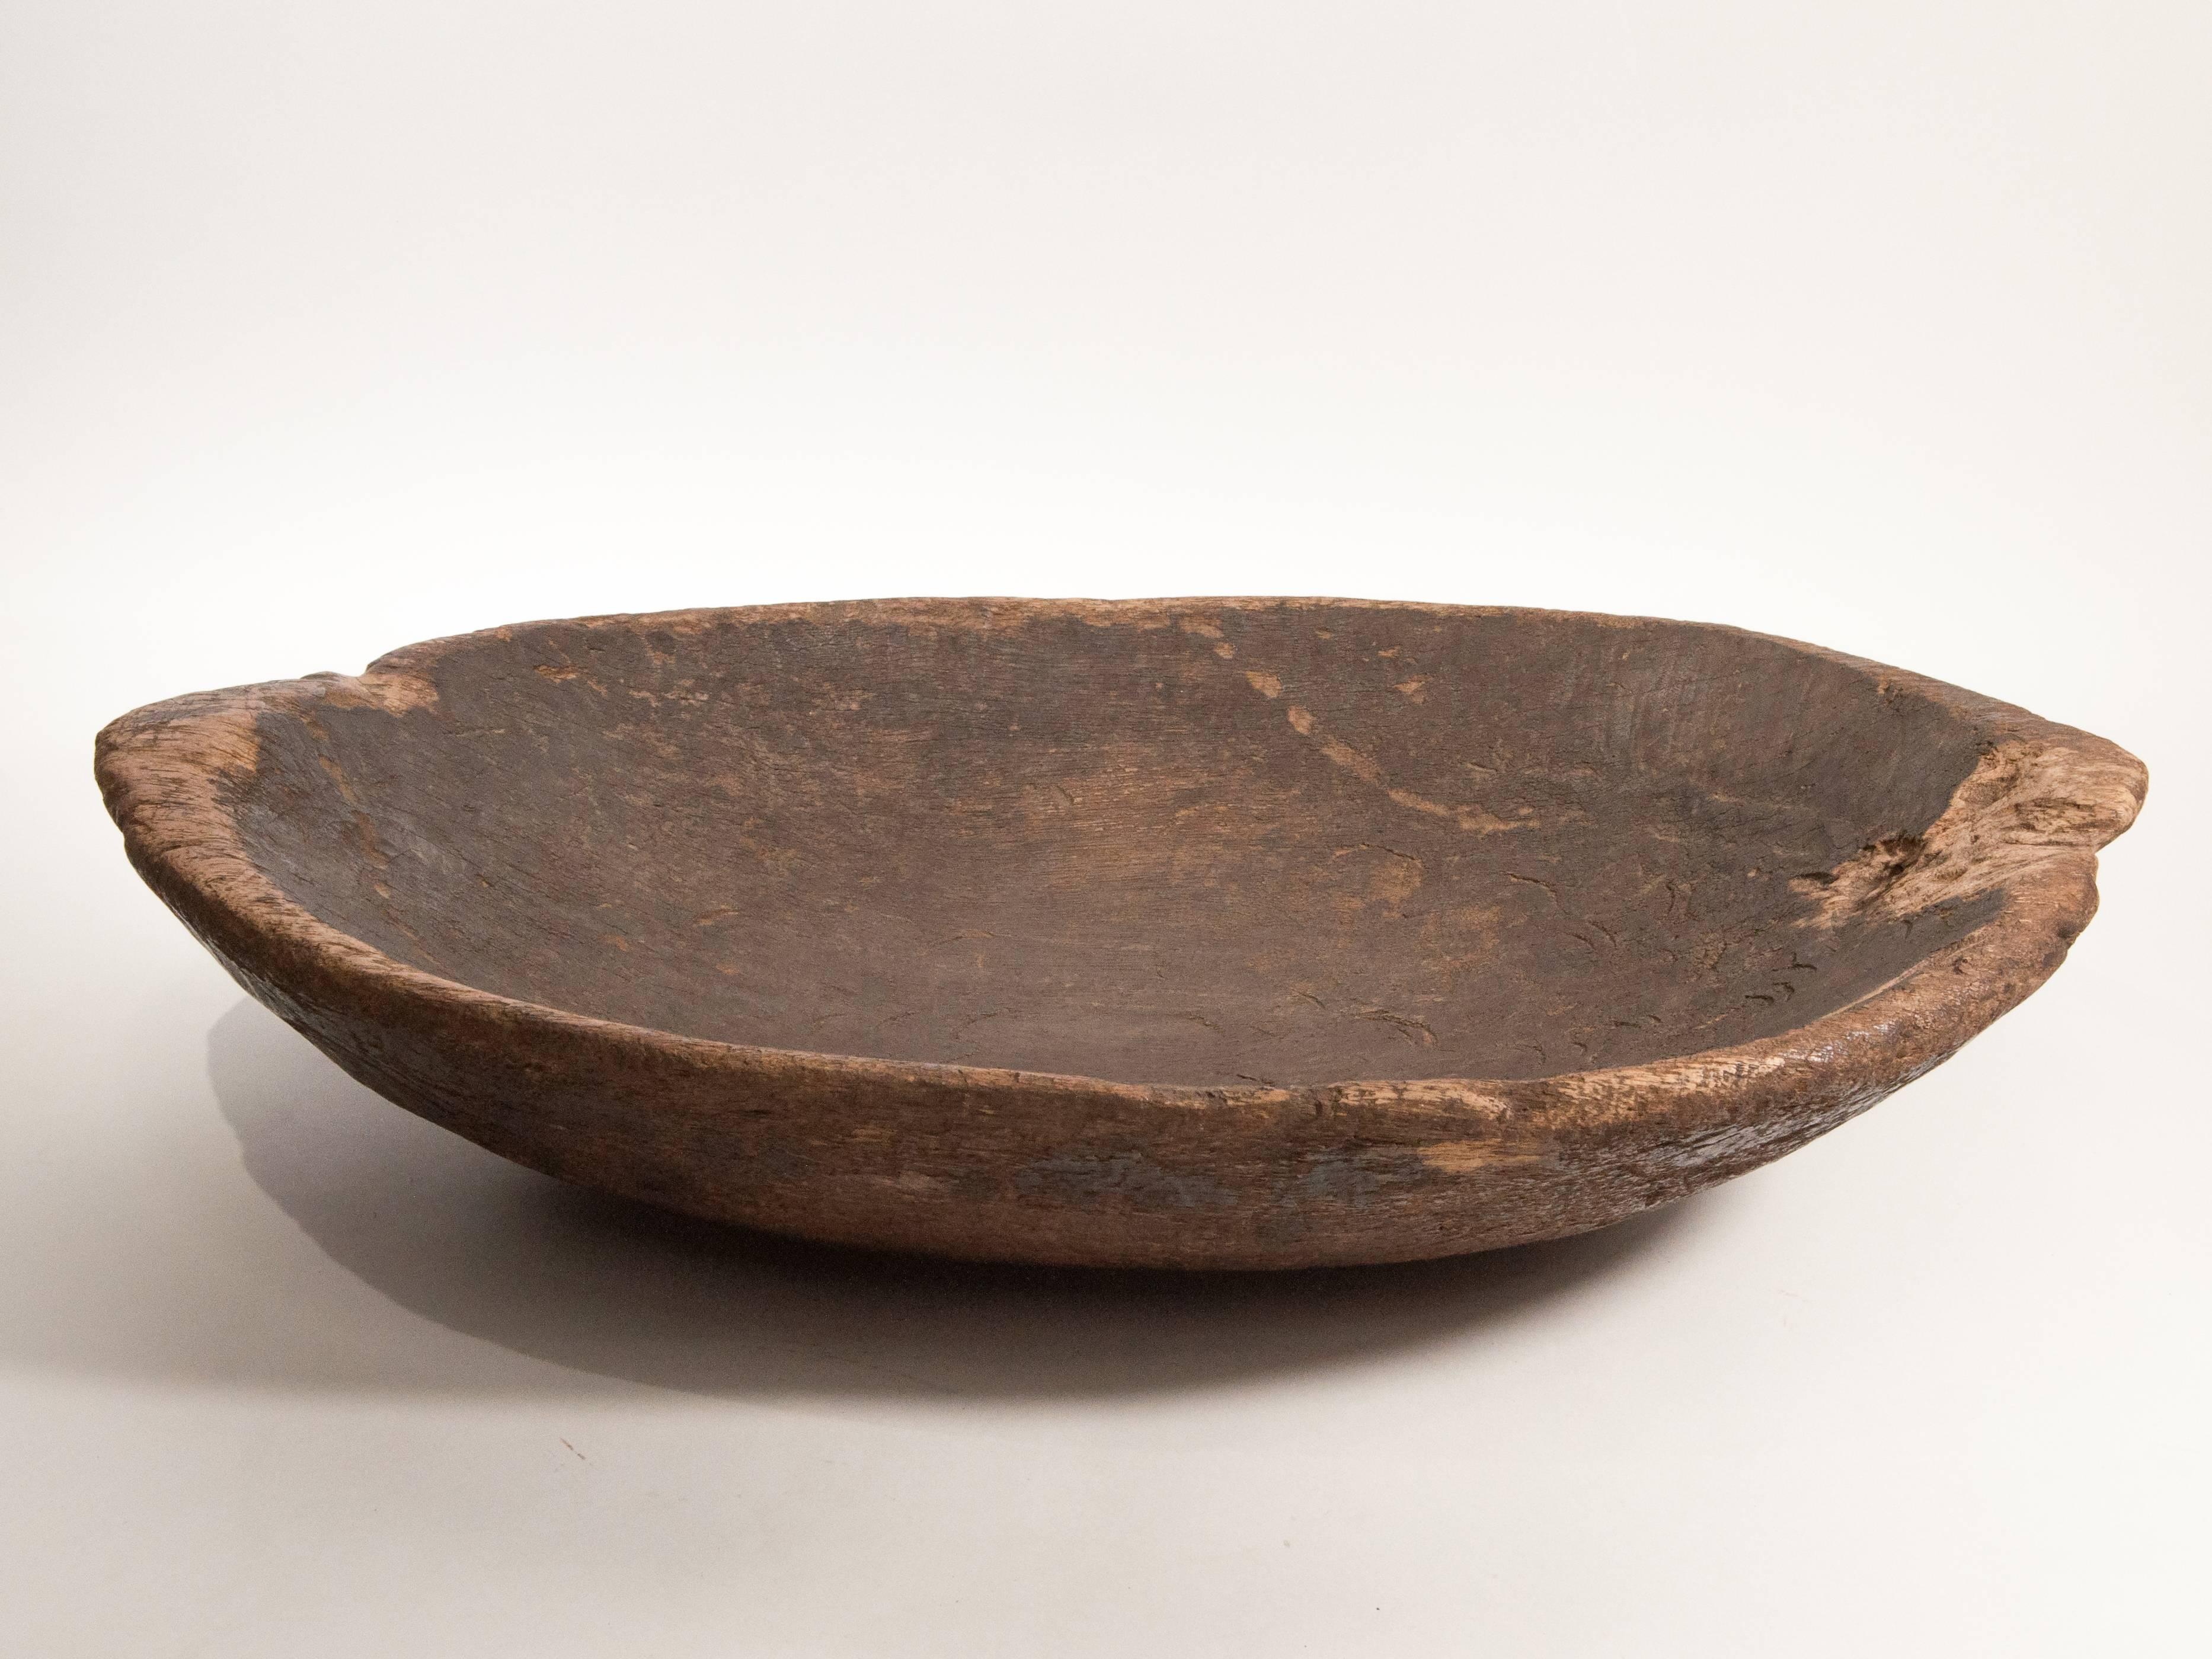 Tribal hand hewn wooden tray Mentawai Island, early to mid-20th century.
Fashioned by hand from a single piece of local hardwood, this oval wooden tray was used to present food and fruits when receiving guests. This particular tray retains its raw